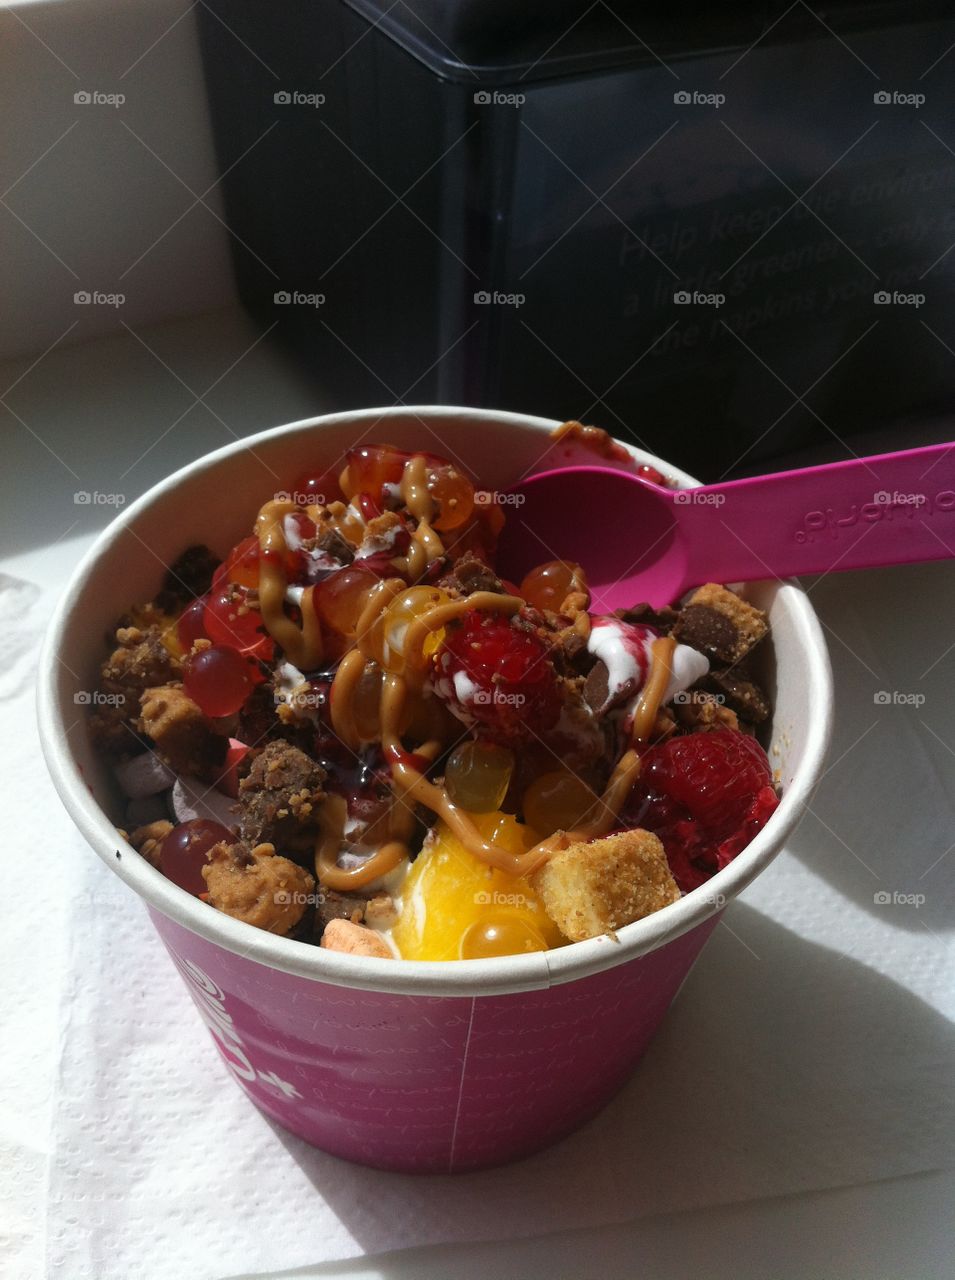 Never enough toppings for my frozen yogurt